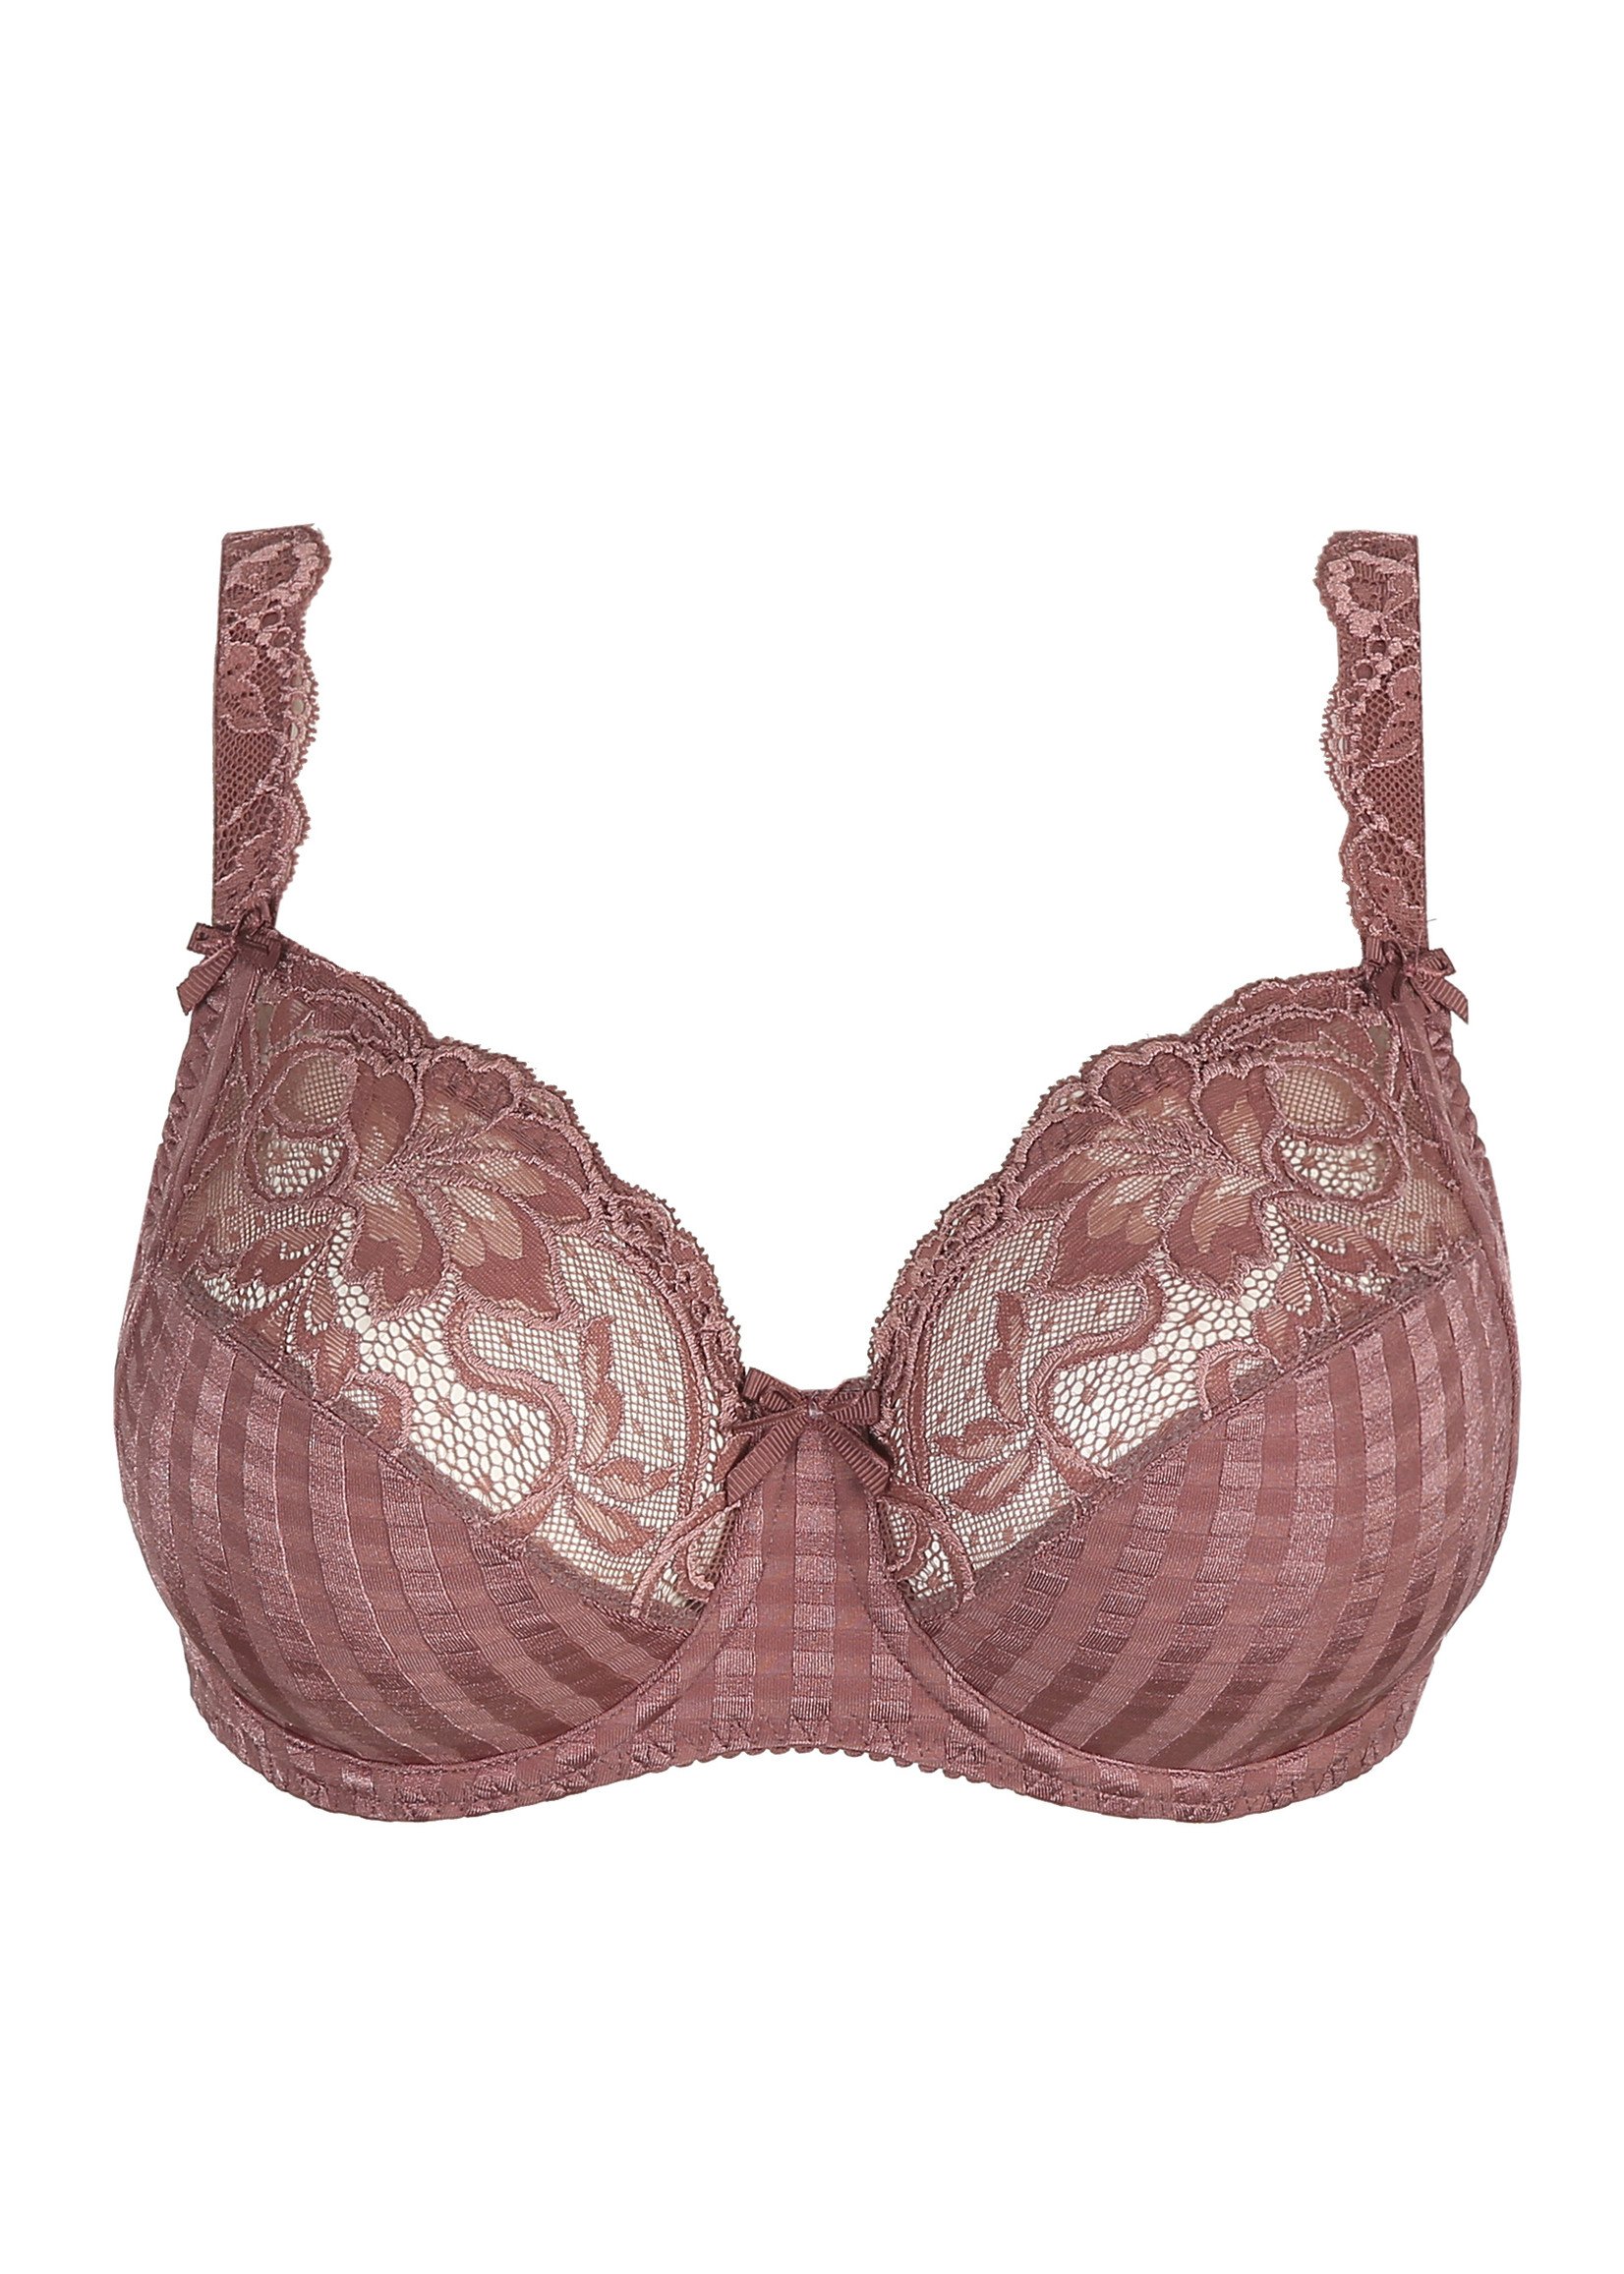 PrimaDonna Madison 0162120/21 Women's Bleu Bijou Lace Wired Full Cup Bra 32D  : PrimaDonna: : Clothing, Shoes & Accessories